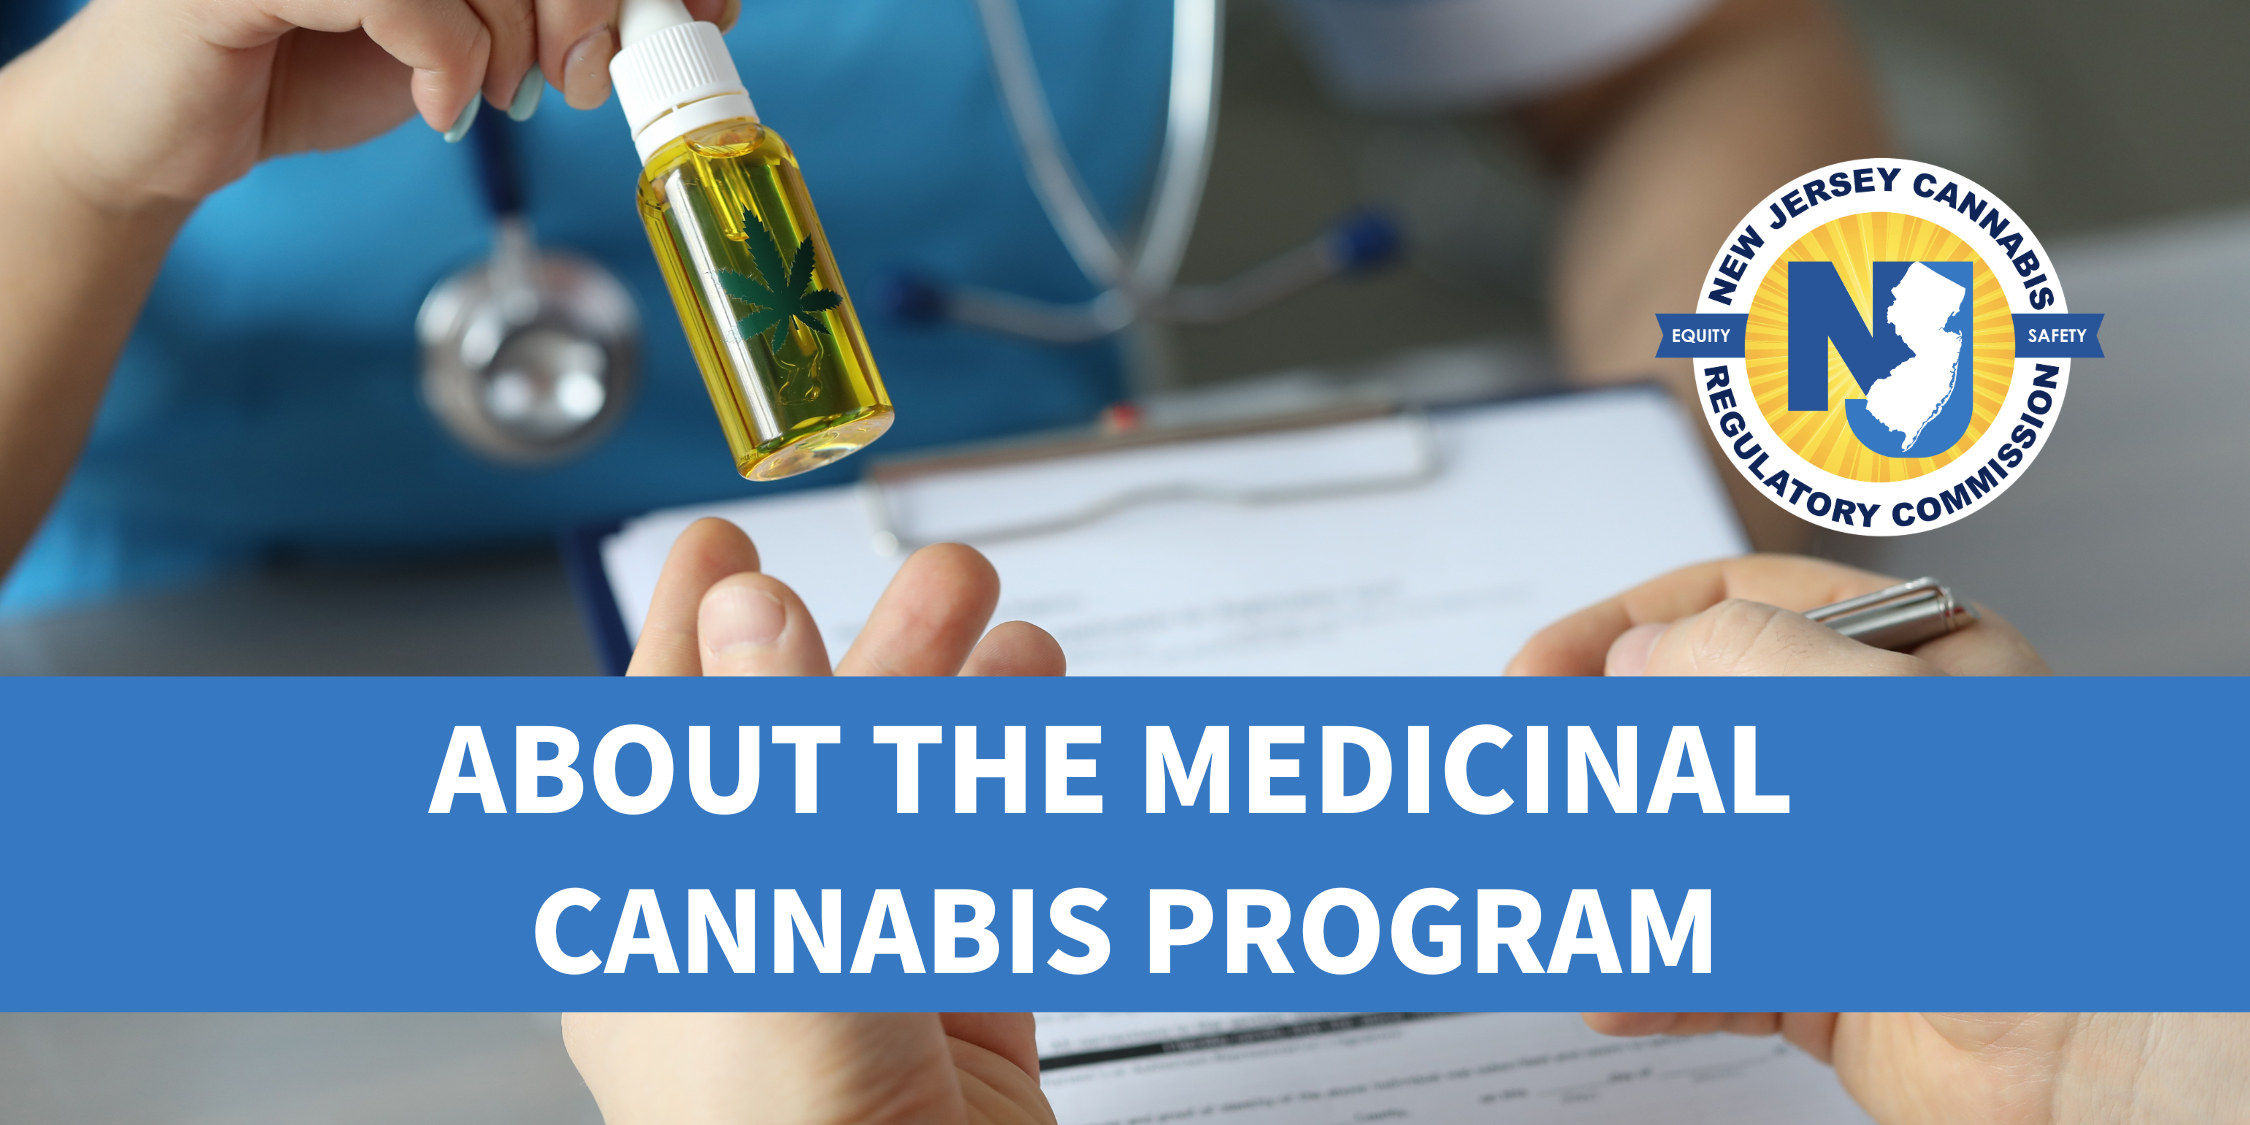 About the Medicinal Cannabis Program